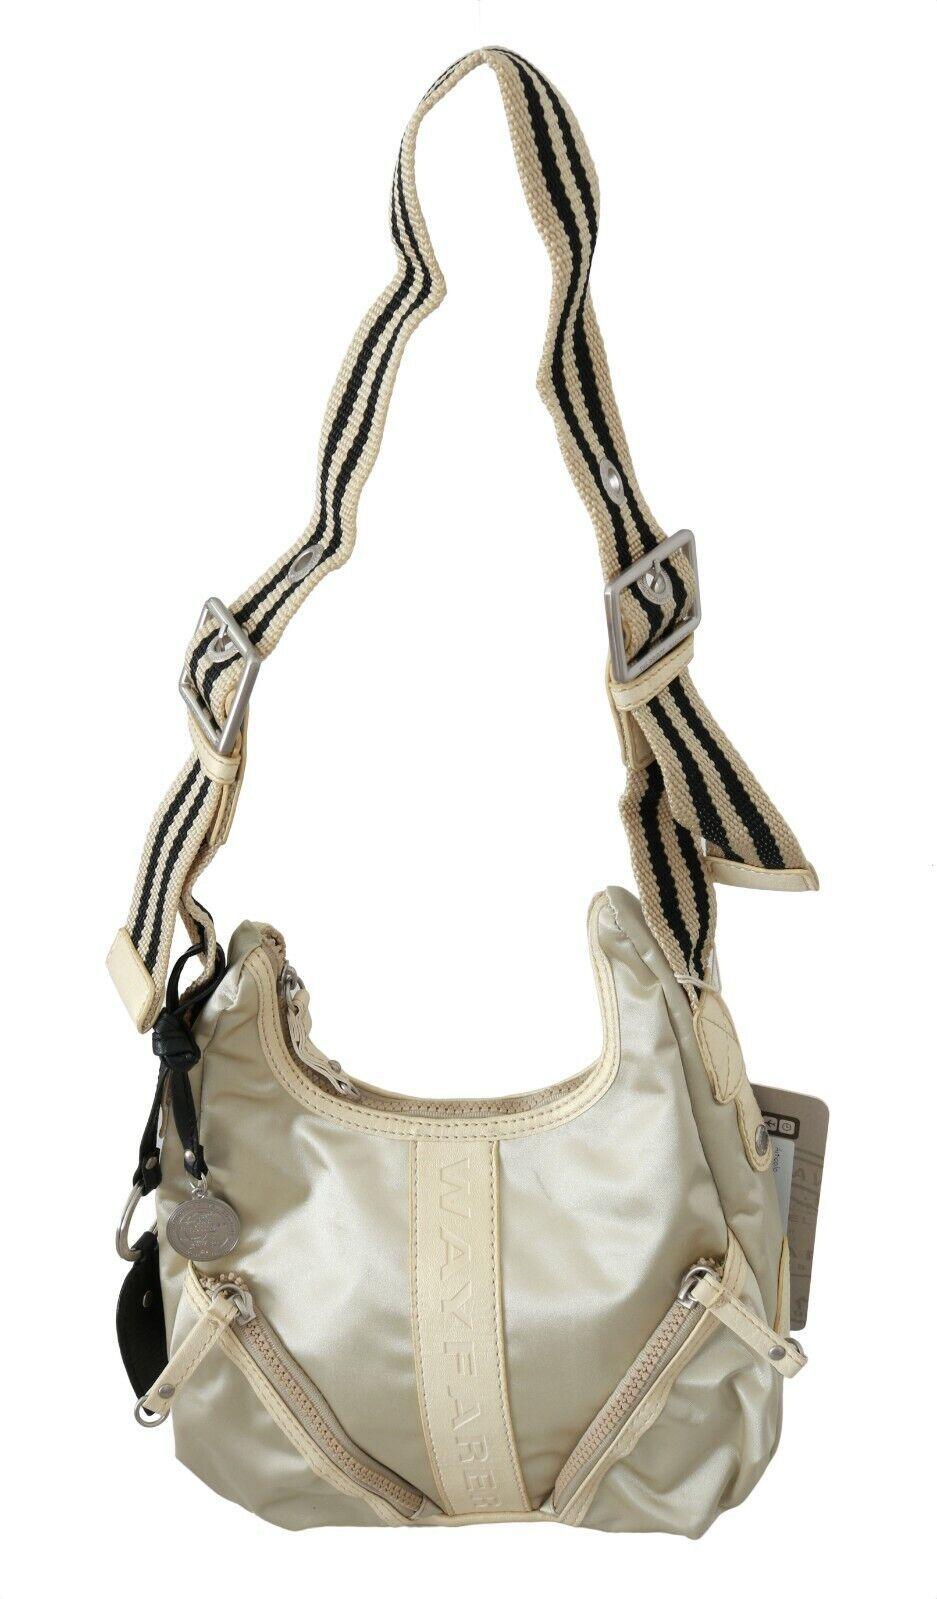 WAYFARER Chic White Fabric Shoulder Bag - Perfect for Any Occasion - PER.FASHION